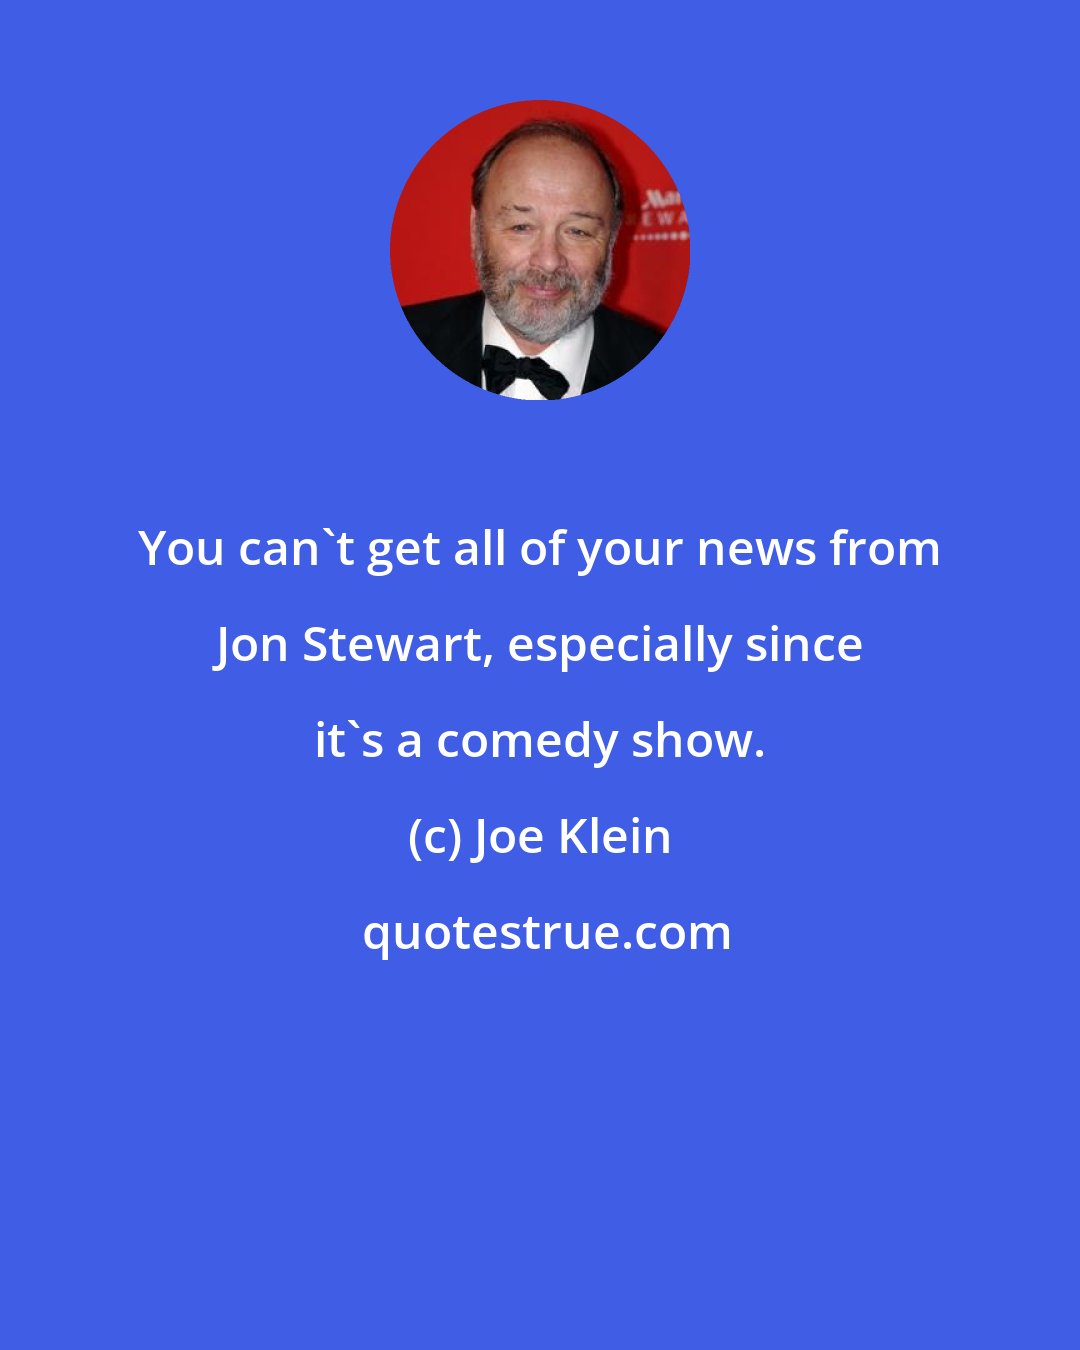 Joe Klein: You can't get all of your news from Jon Stewart, especially since it's a comedy show.